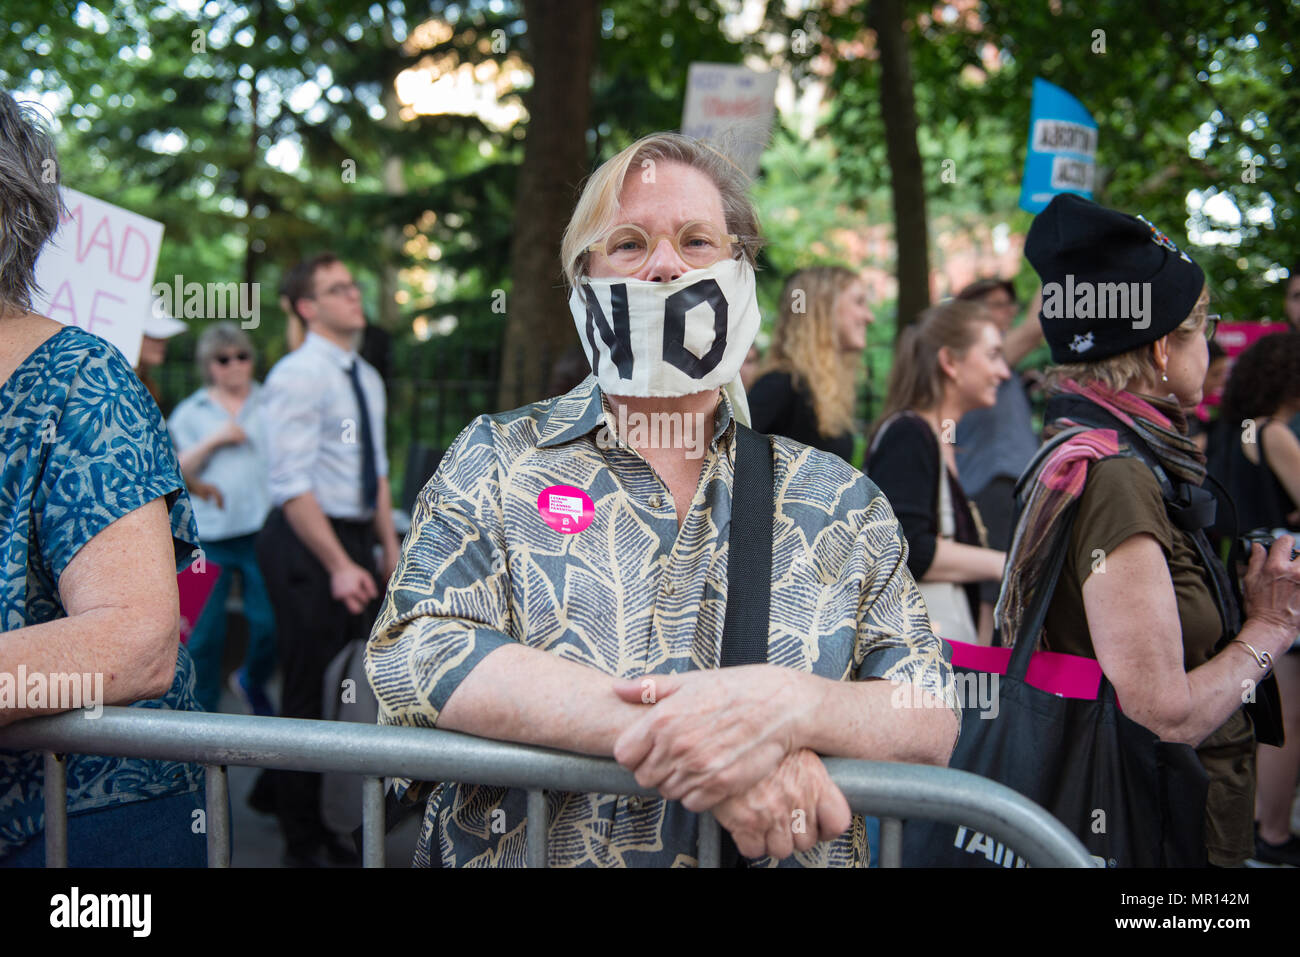 New York, USA. 24th May 2018. A woman wearing a 'NO' speech mask covering her mouth at a Title X (Title Ten) gag rule rally in New York City, hosted by Planned Parenthood of New York City on May 24th 2018, reacting the President Trump's attempt to ban Medicaid and federal funding to medical providers who provide full, legal medical information to patients wanting or needing abortion services. Credit: Brigette Supernova/Alamy Live News Stock Photo